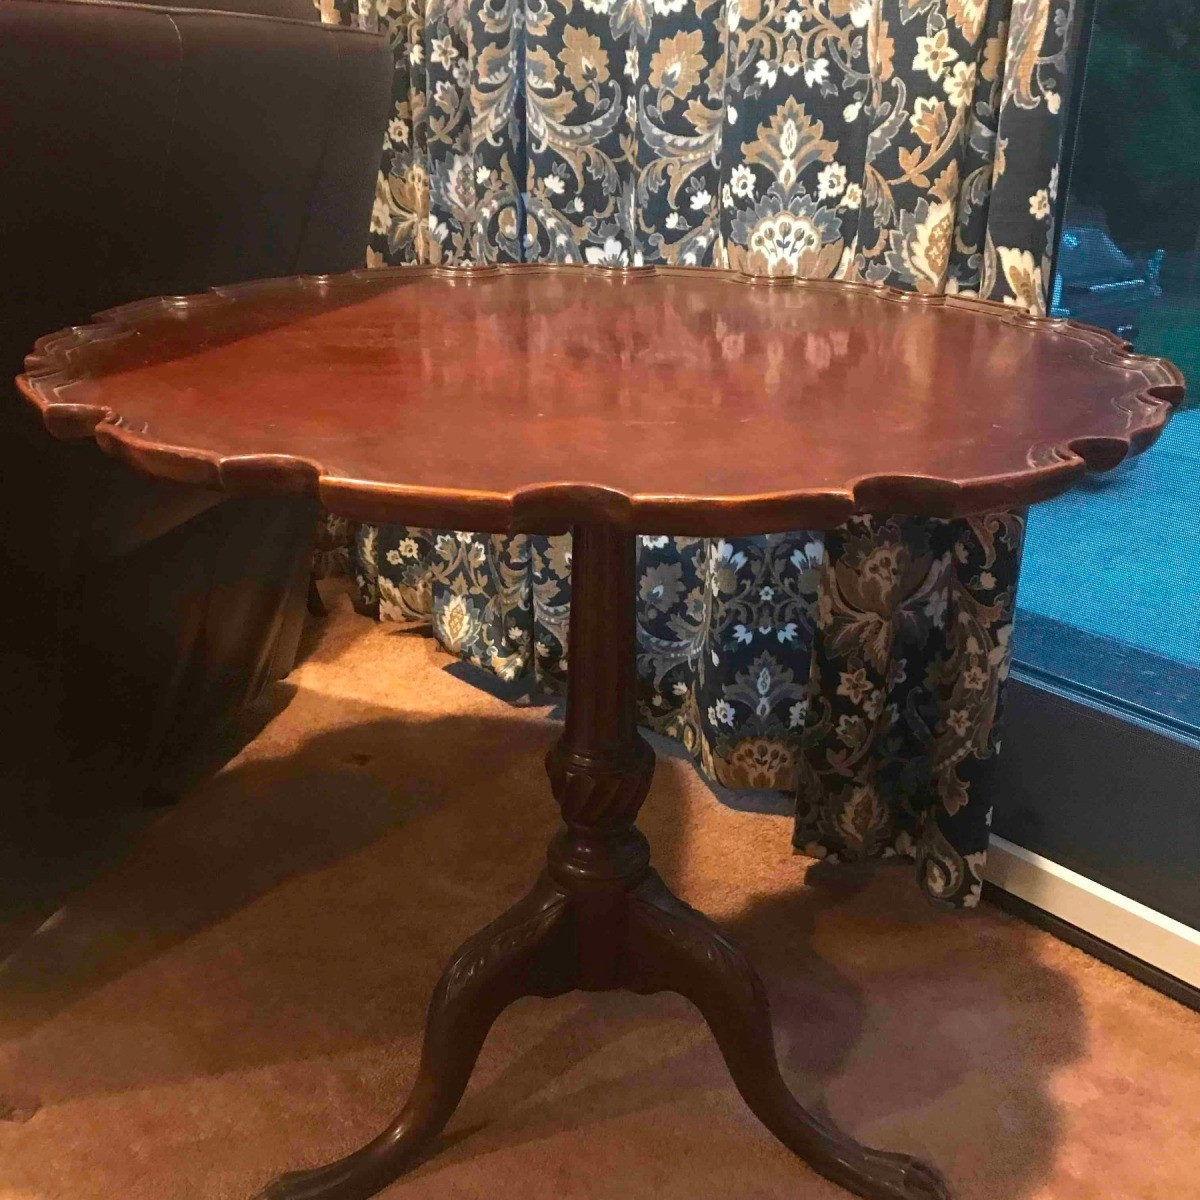 Value of a Vintage Pie Crust Table? | ThriftyFun